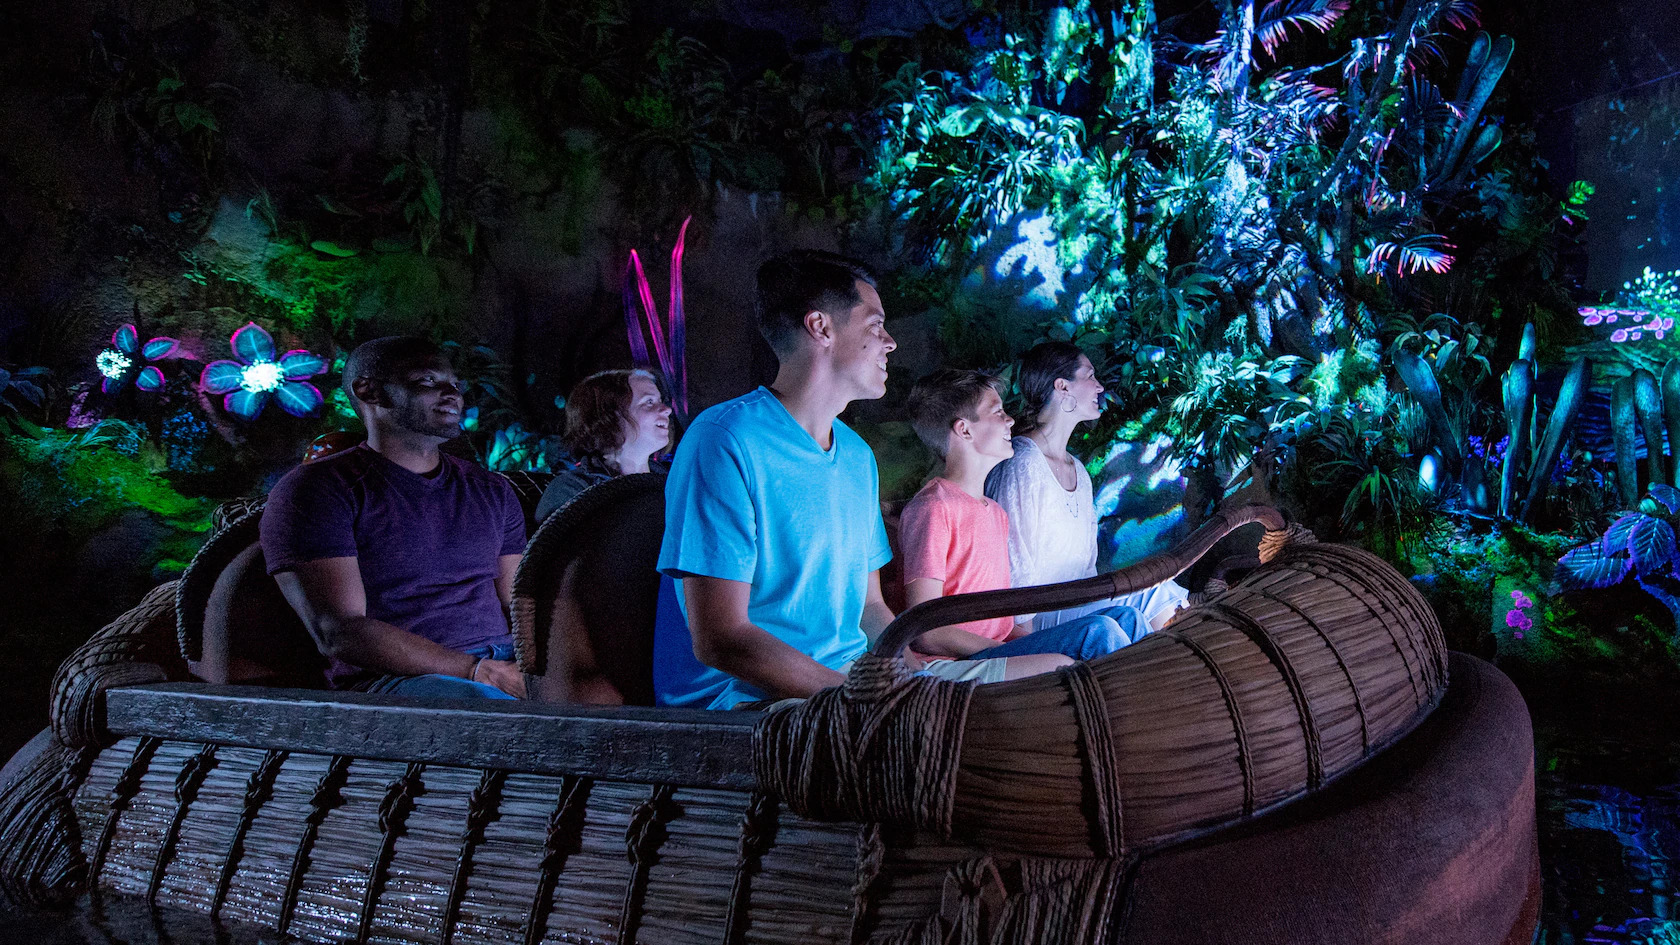 Na'vi River Journey Overview | Disney's Animal Kingdom Attractions